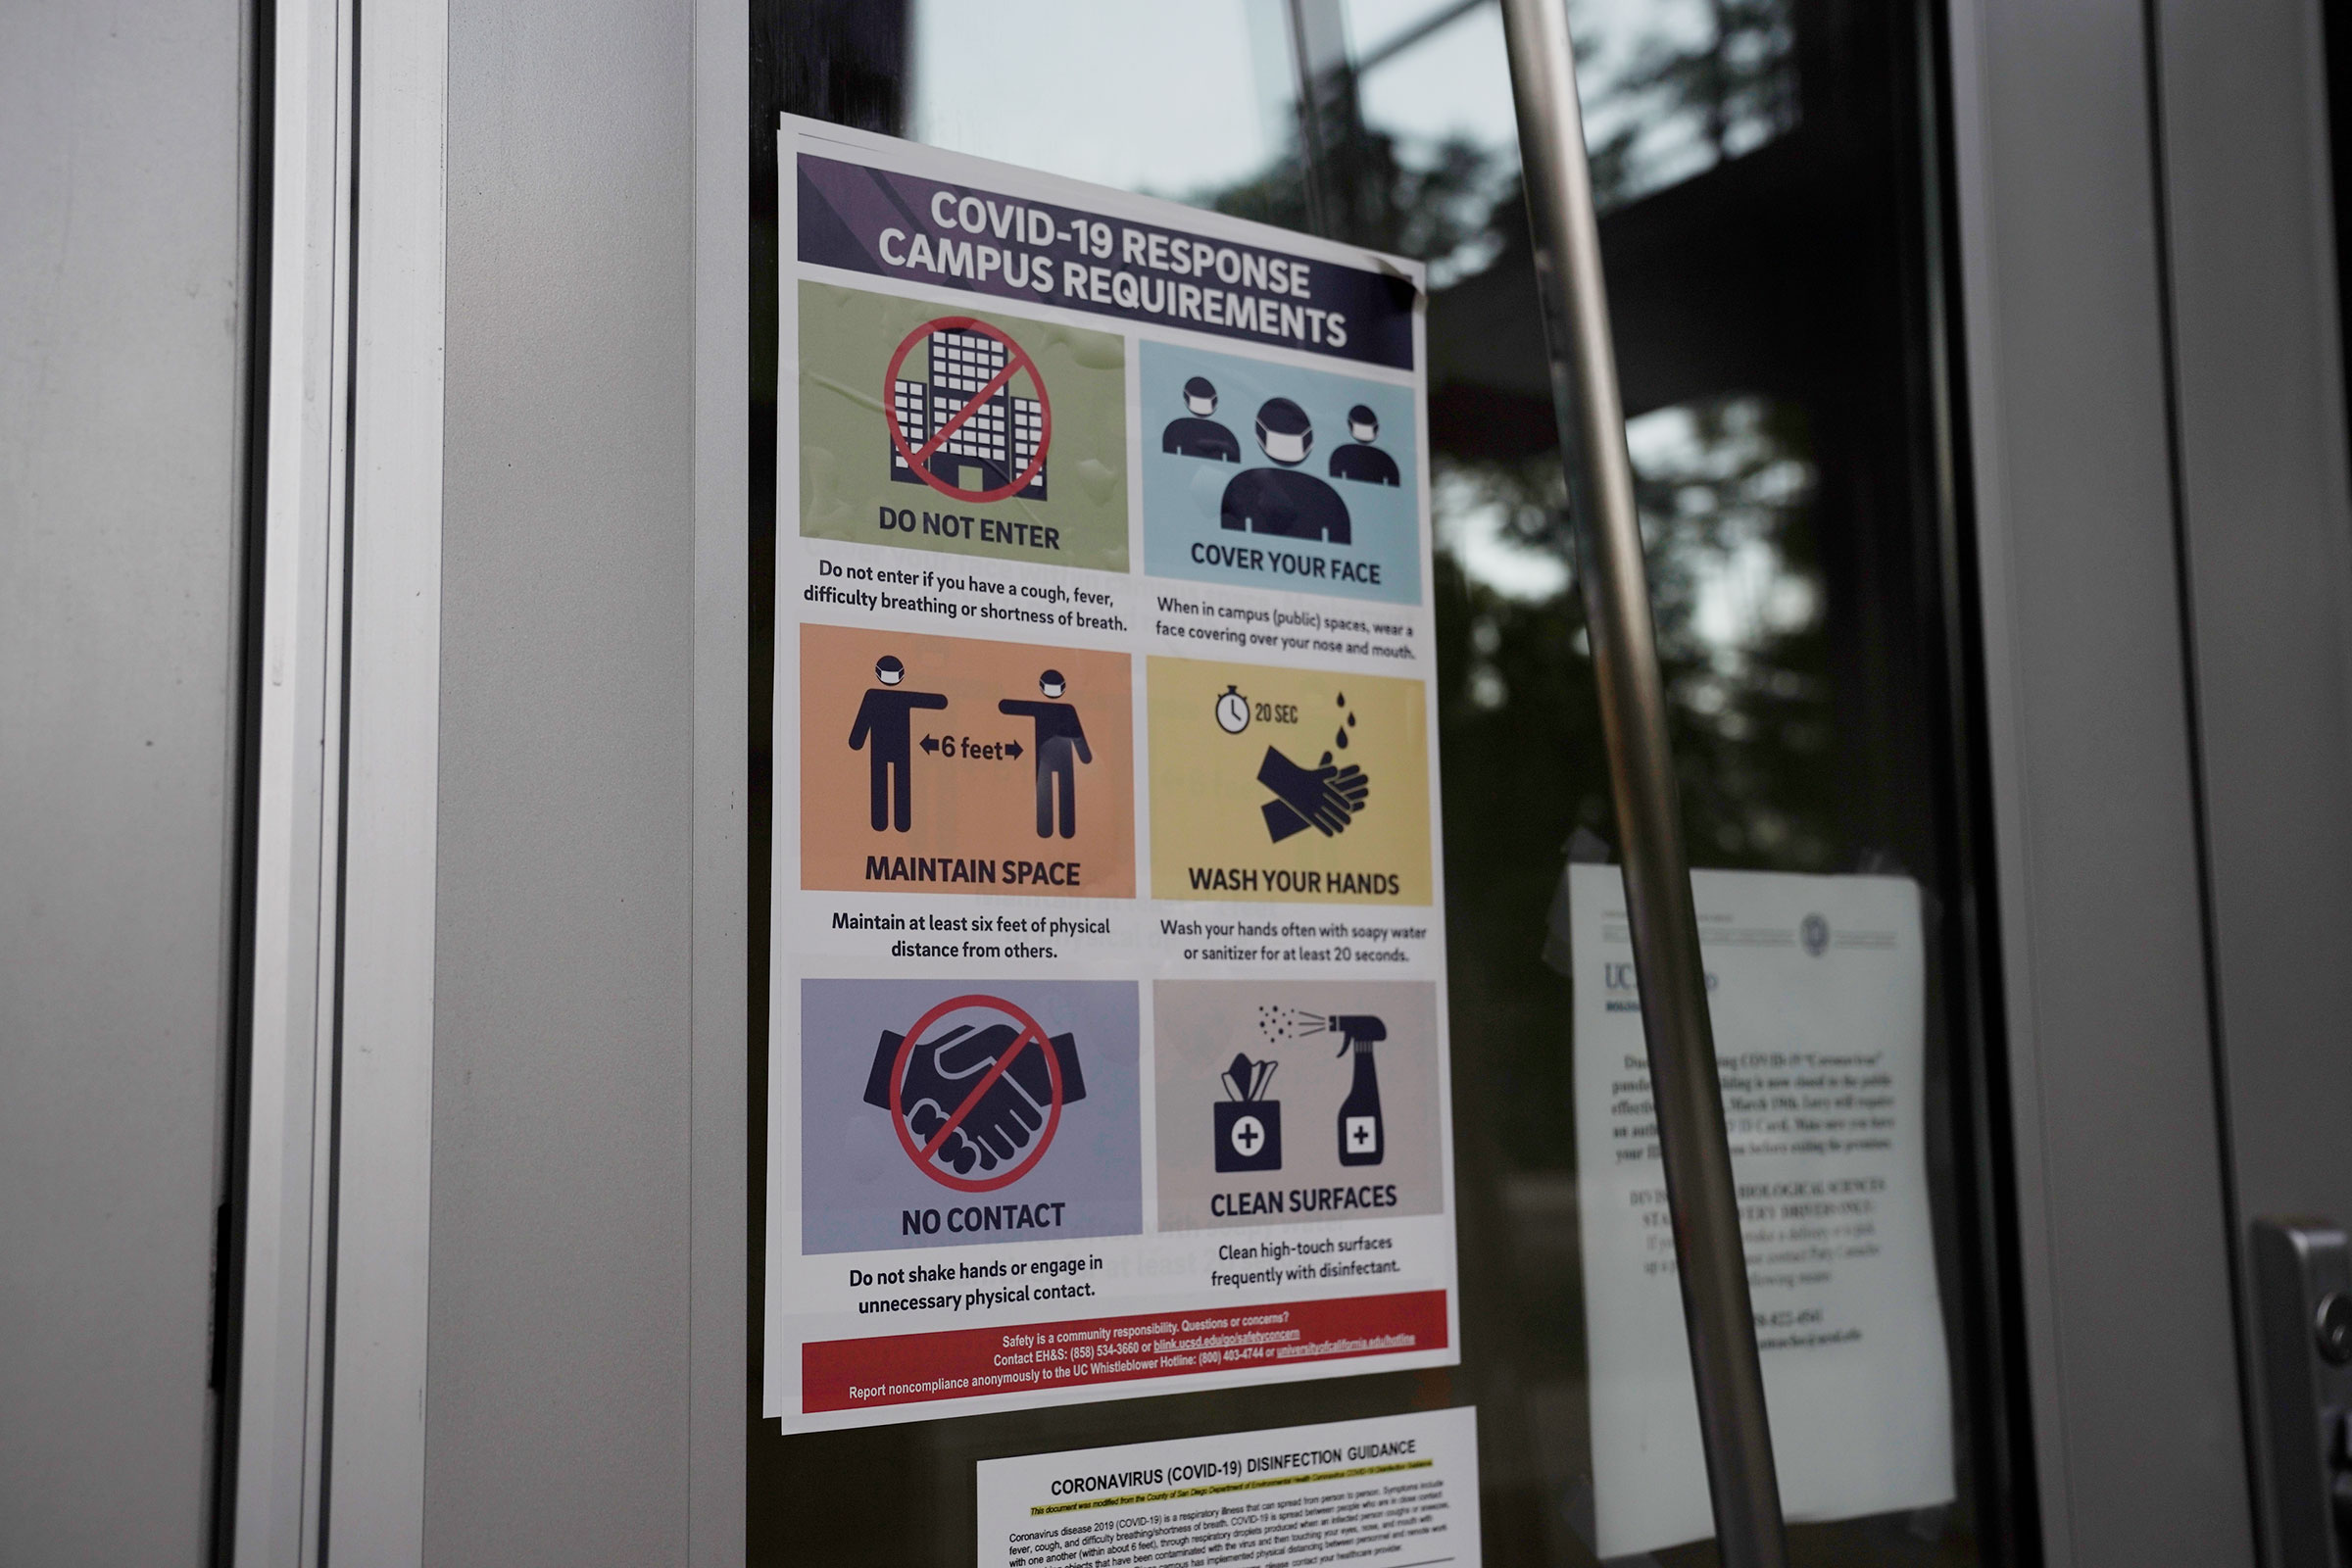 A "Covid-19 Response Campus Requirements" sign is displayed at the University of California San Diego on July 9, 2020. (Bing Guan—Bloomberg/Getty Images)